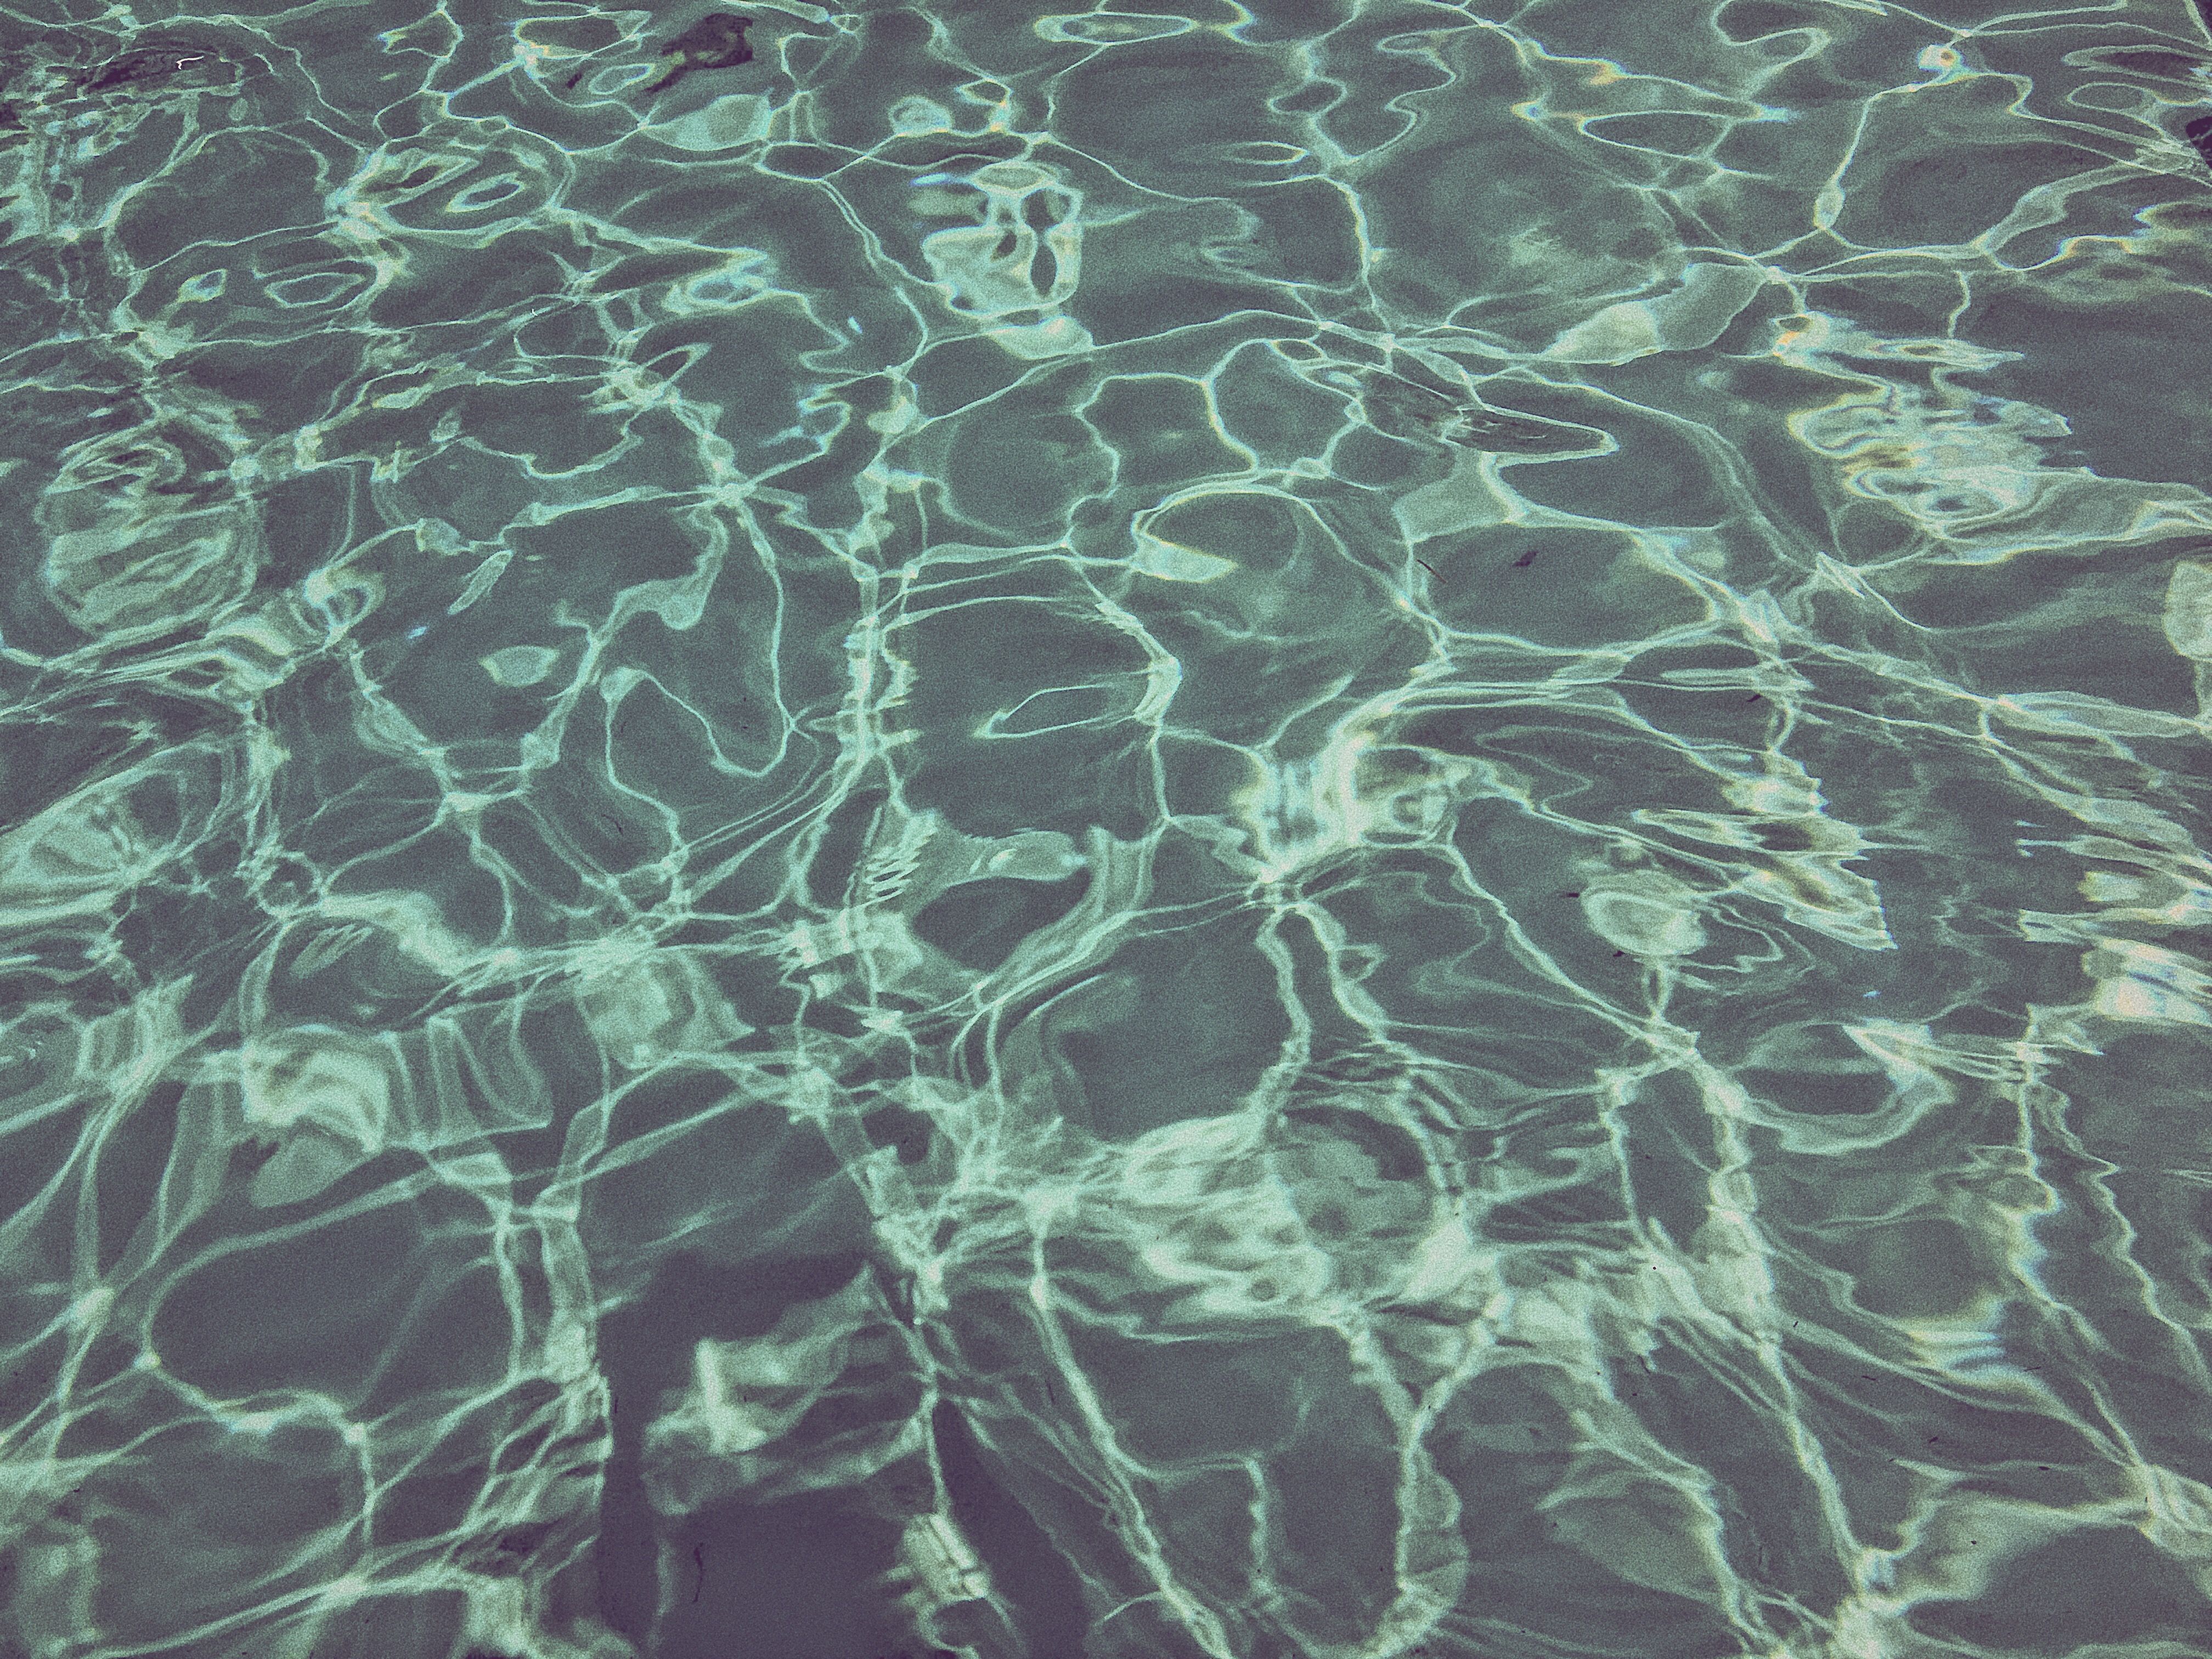 The surface of a pool, with ripples and reflections of light. - Swimming pool